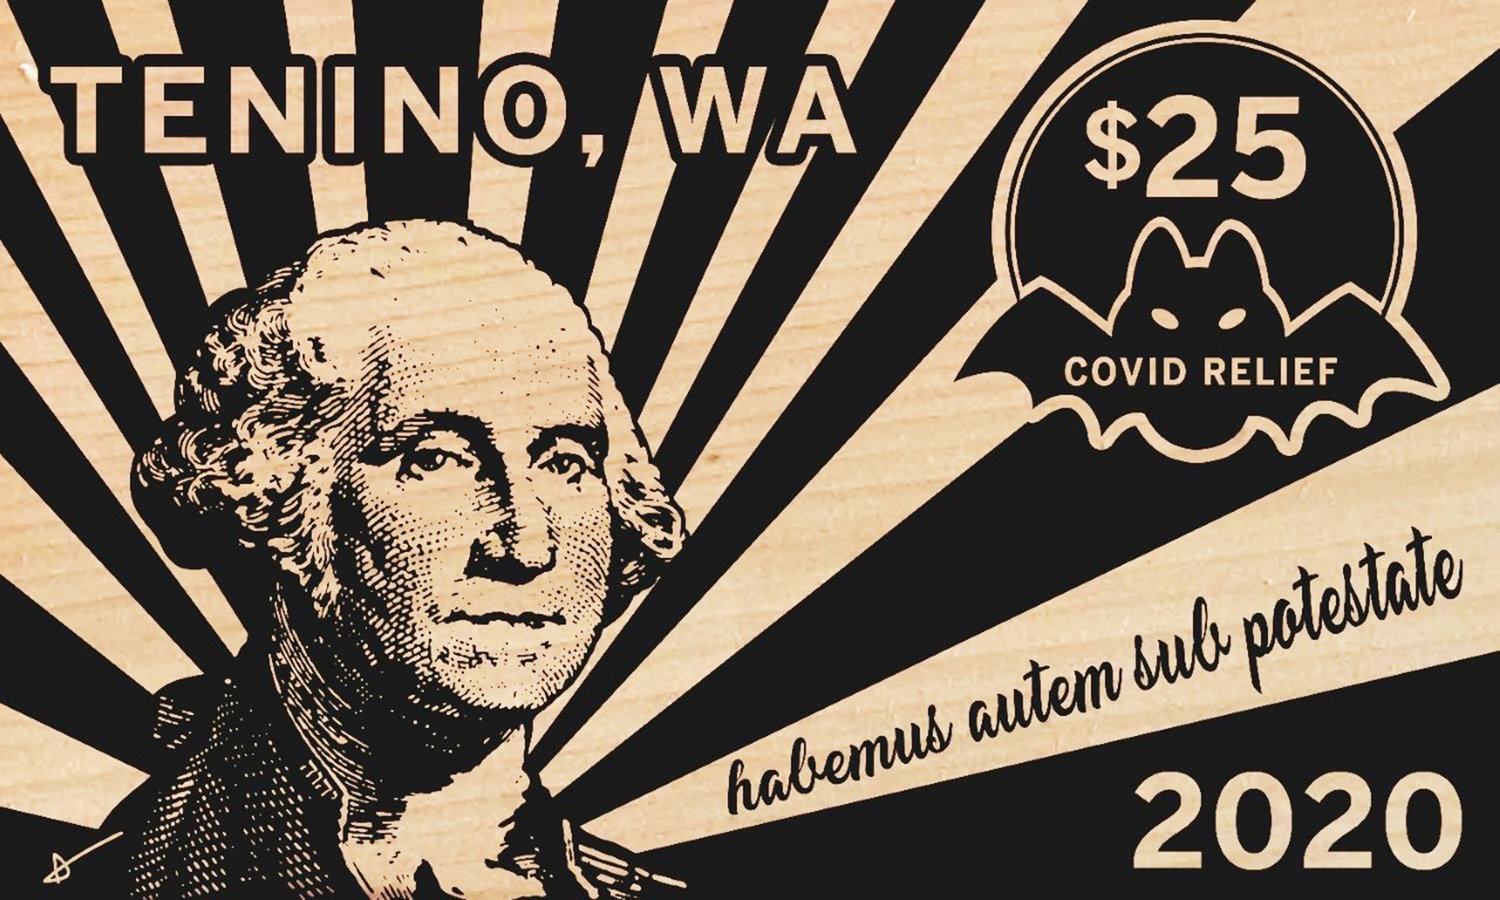 This wooden scrip will help some Tenino residents weather the hardships caused by COVID-19. It will be redeemable with particpating Tenino businesses and is an updated version of similar wooden scrip Tenino first employed during the Great Depression.